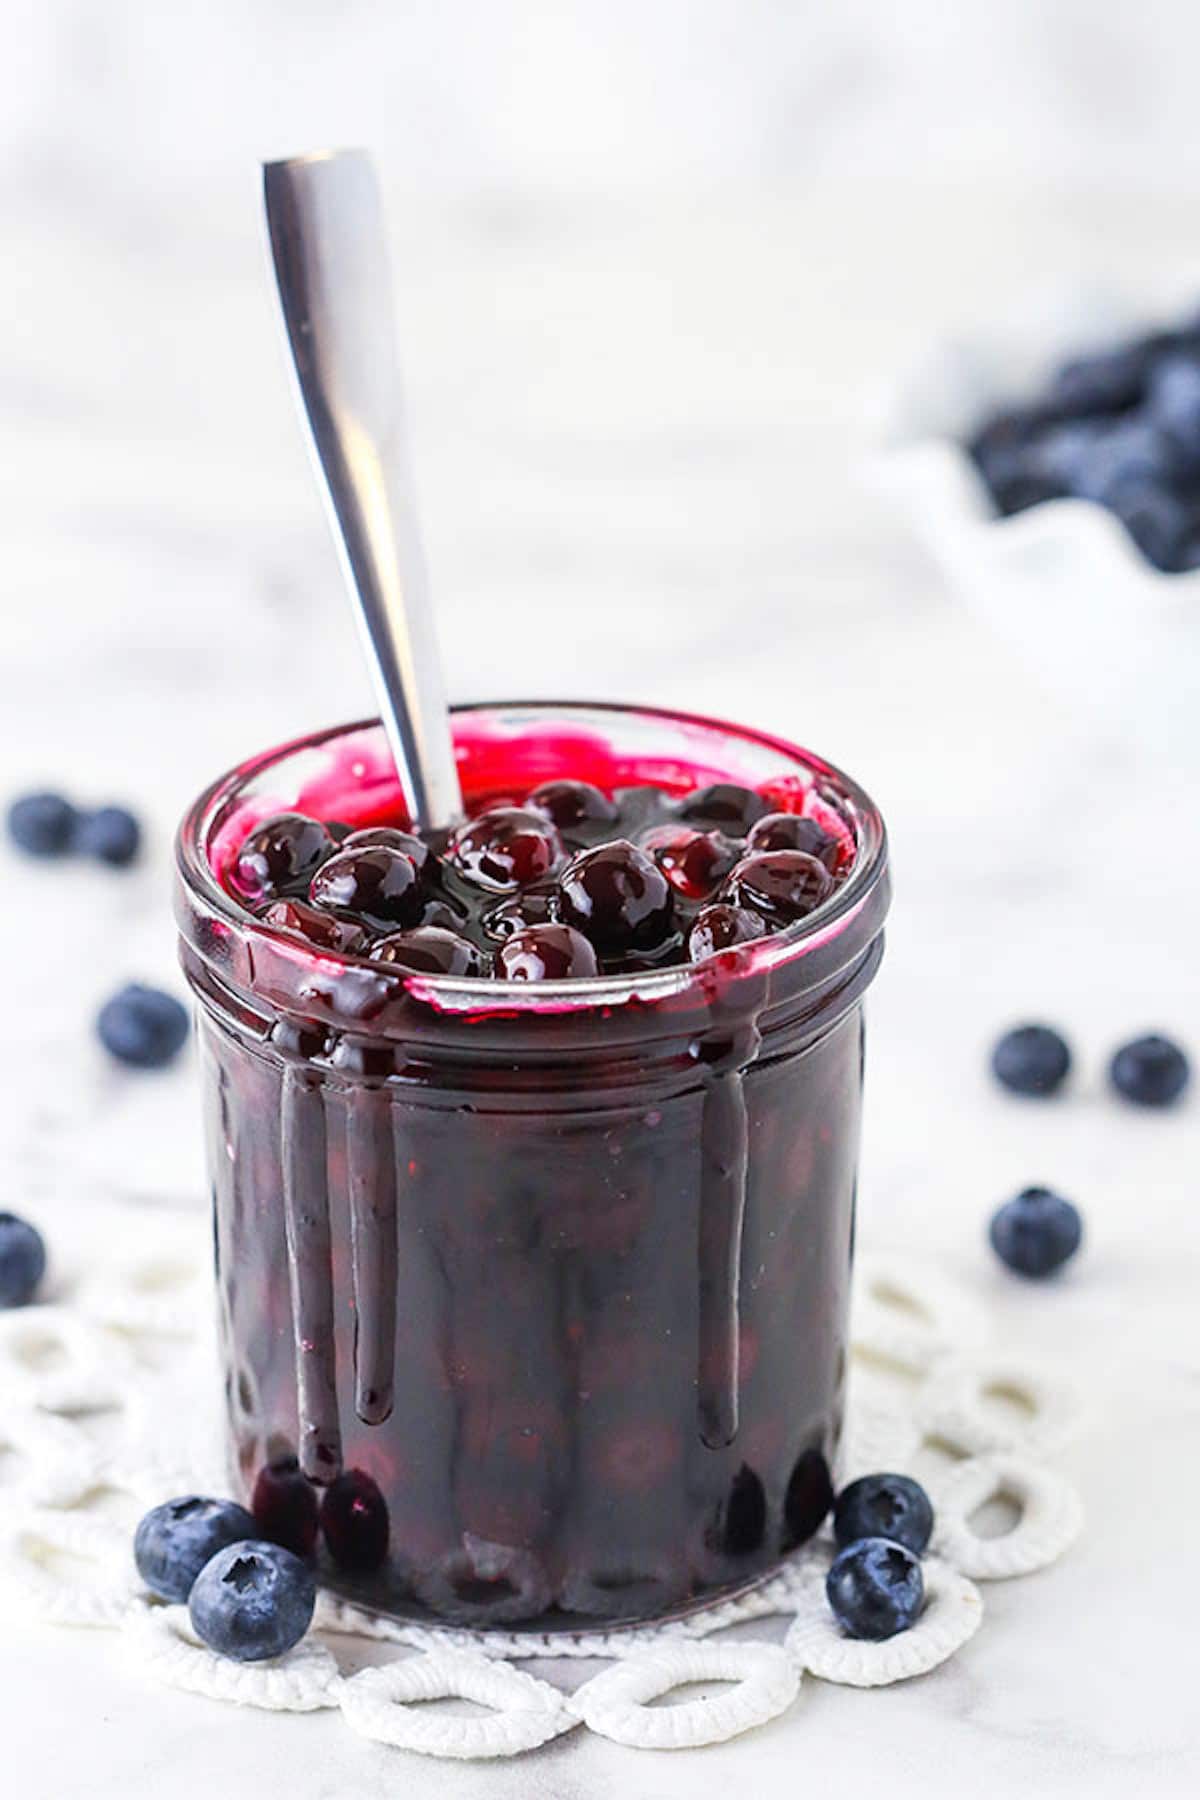 A Jar of Blueberry Sauce with a Metal Spoon Inside